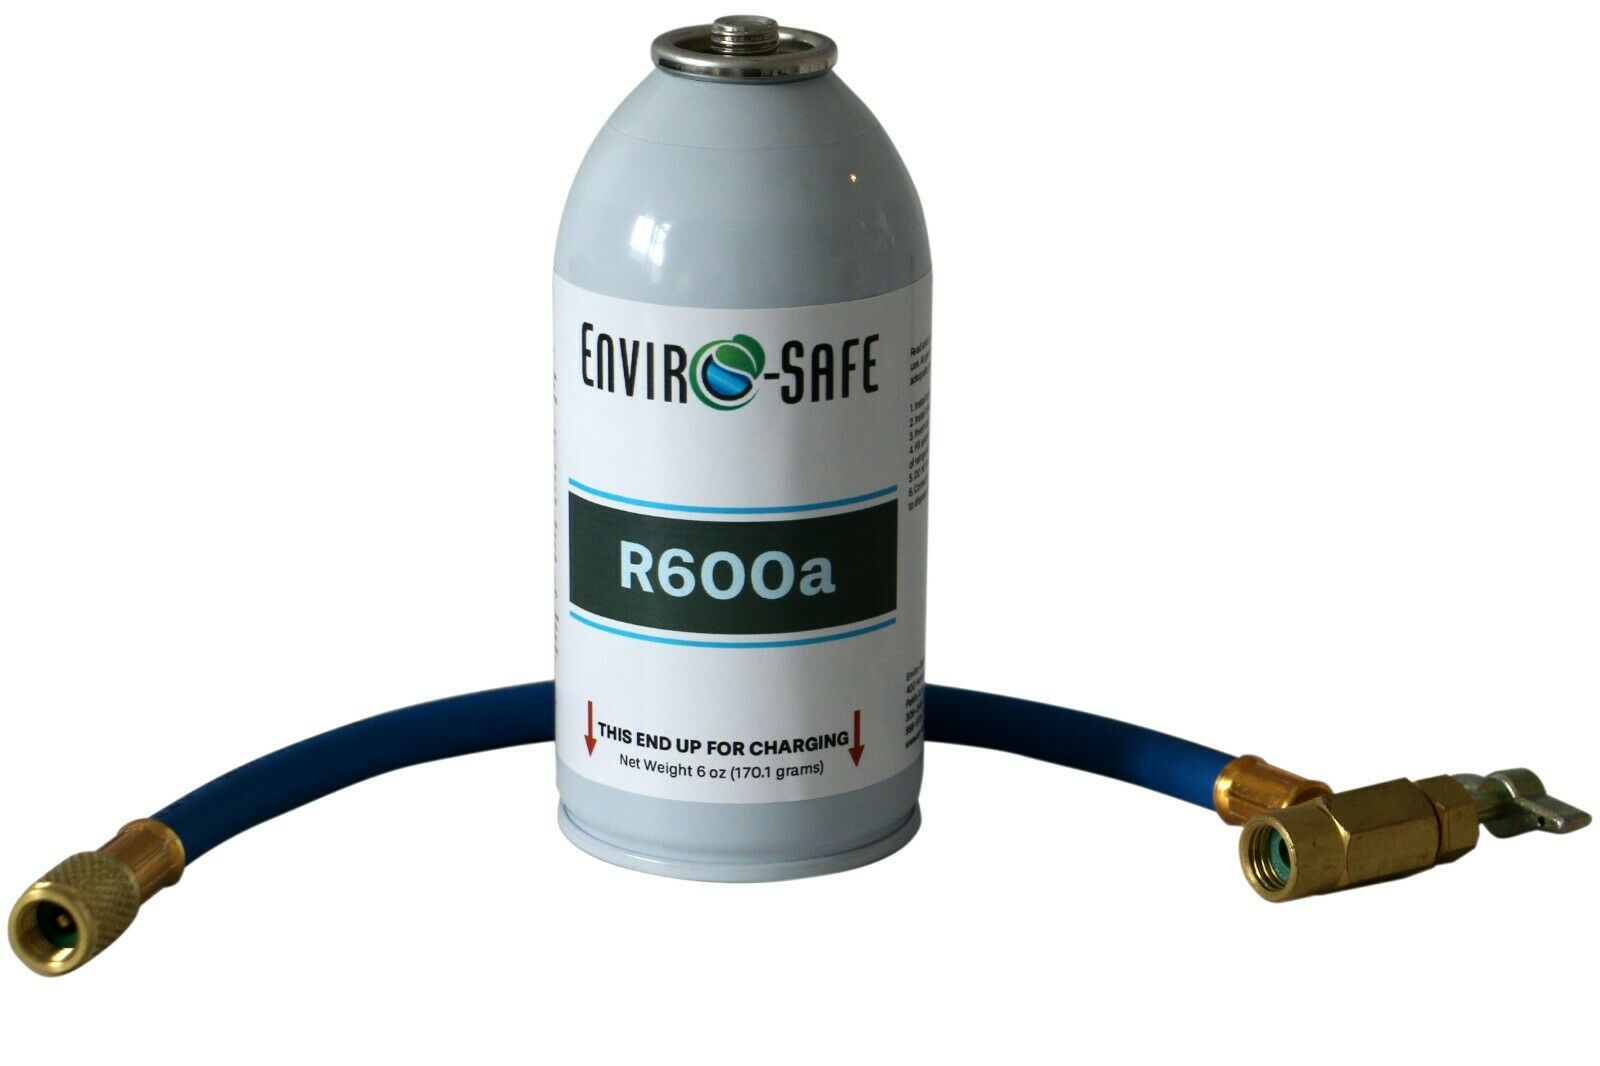 Enviro-safe R600a 6 Oz Can With Hose Kit #8051